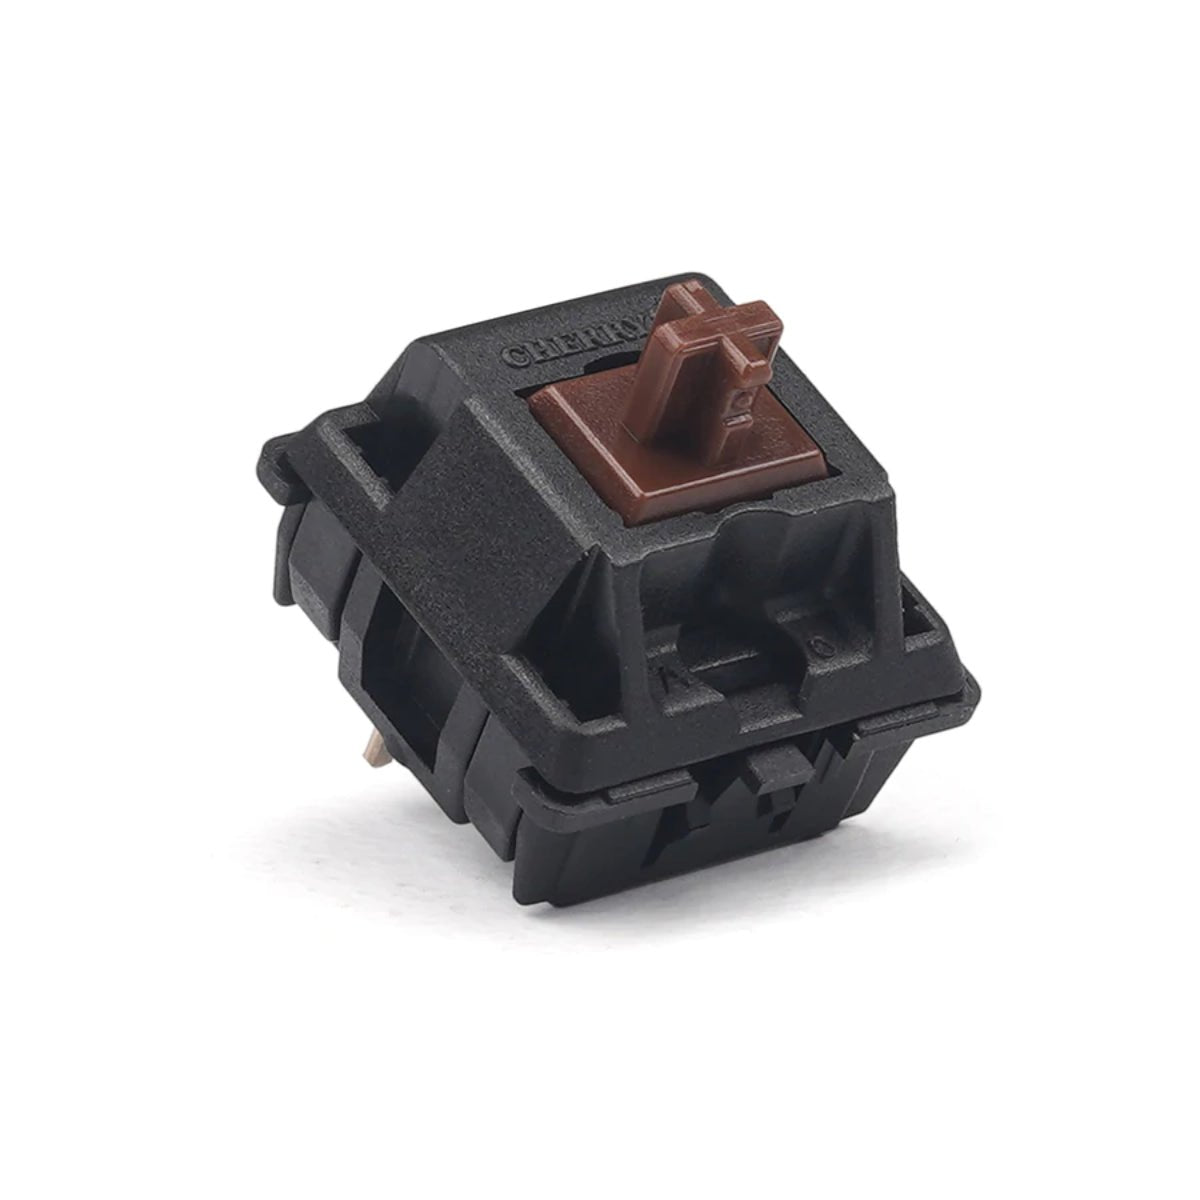 KBD Fans Cherry MX Hyperglide Switches - Brown - Store 974 | ستور ٩٧٤